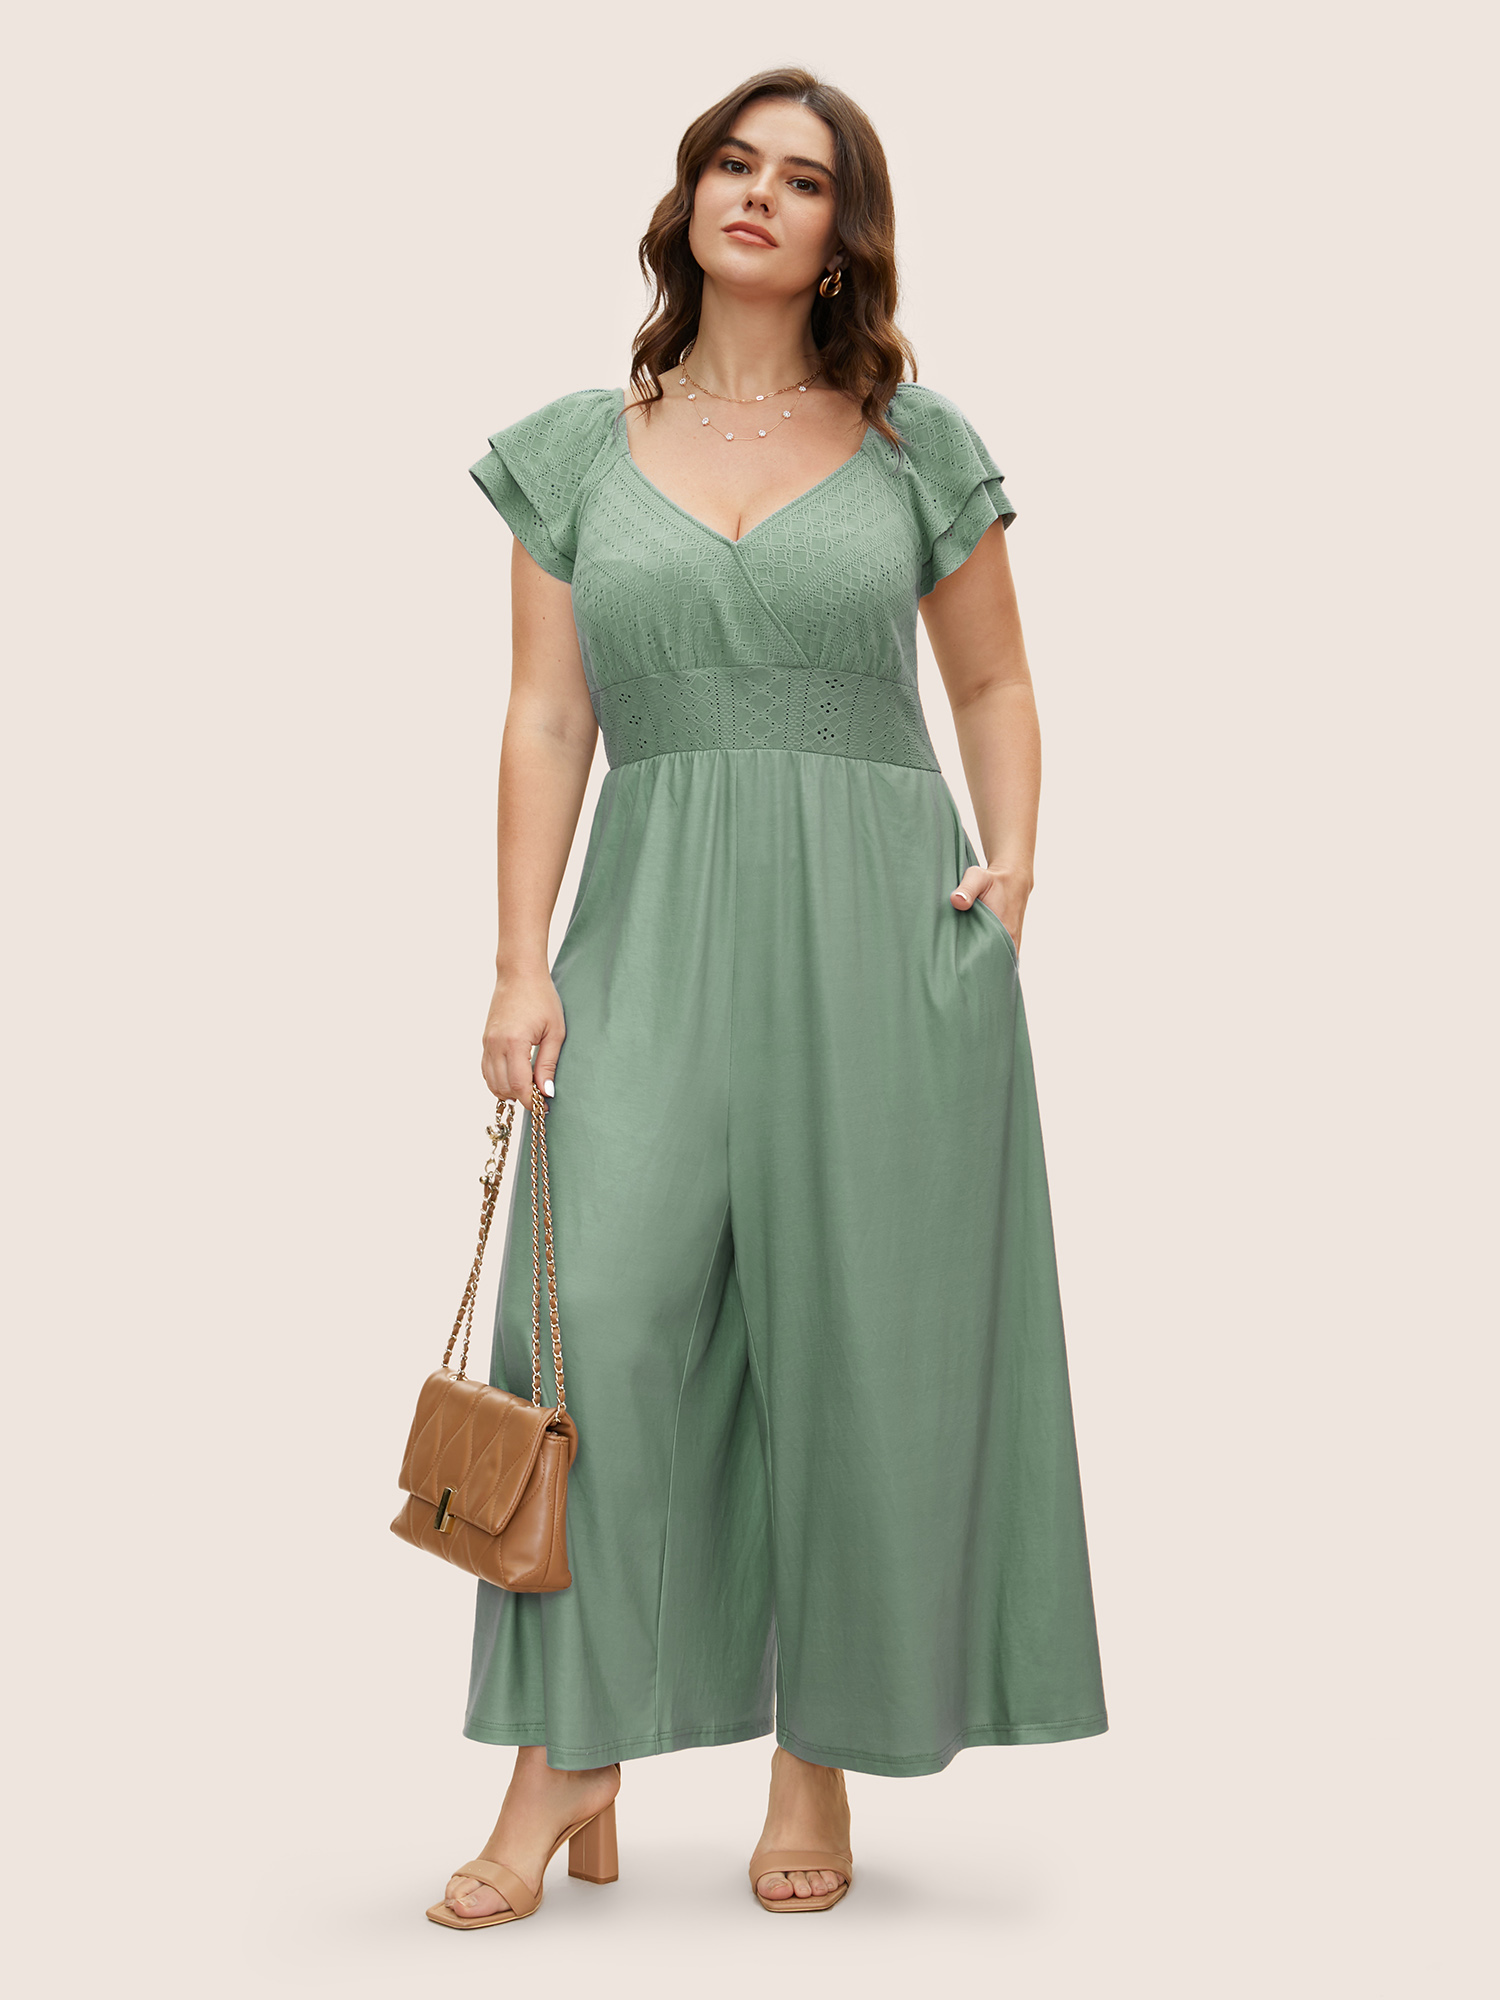 

Plus Size Sage Eyelet Embroidery Tiered Ruffle Trim Jumpsuit Women Elegant Cap Sleeve Heart neckline Everyday Loose Jumpsuits BloomChic